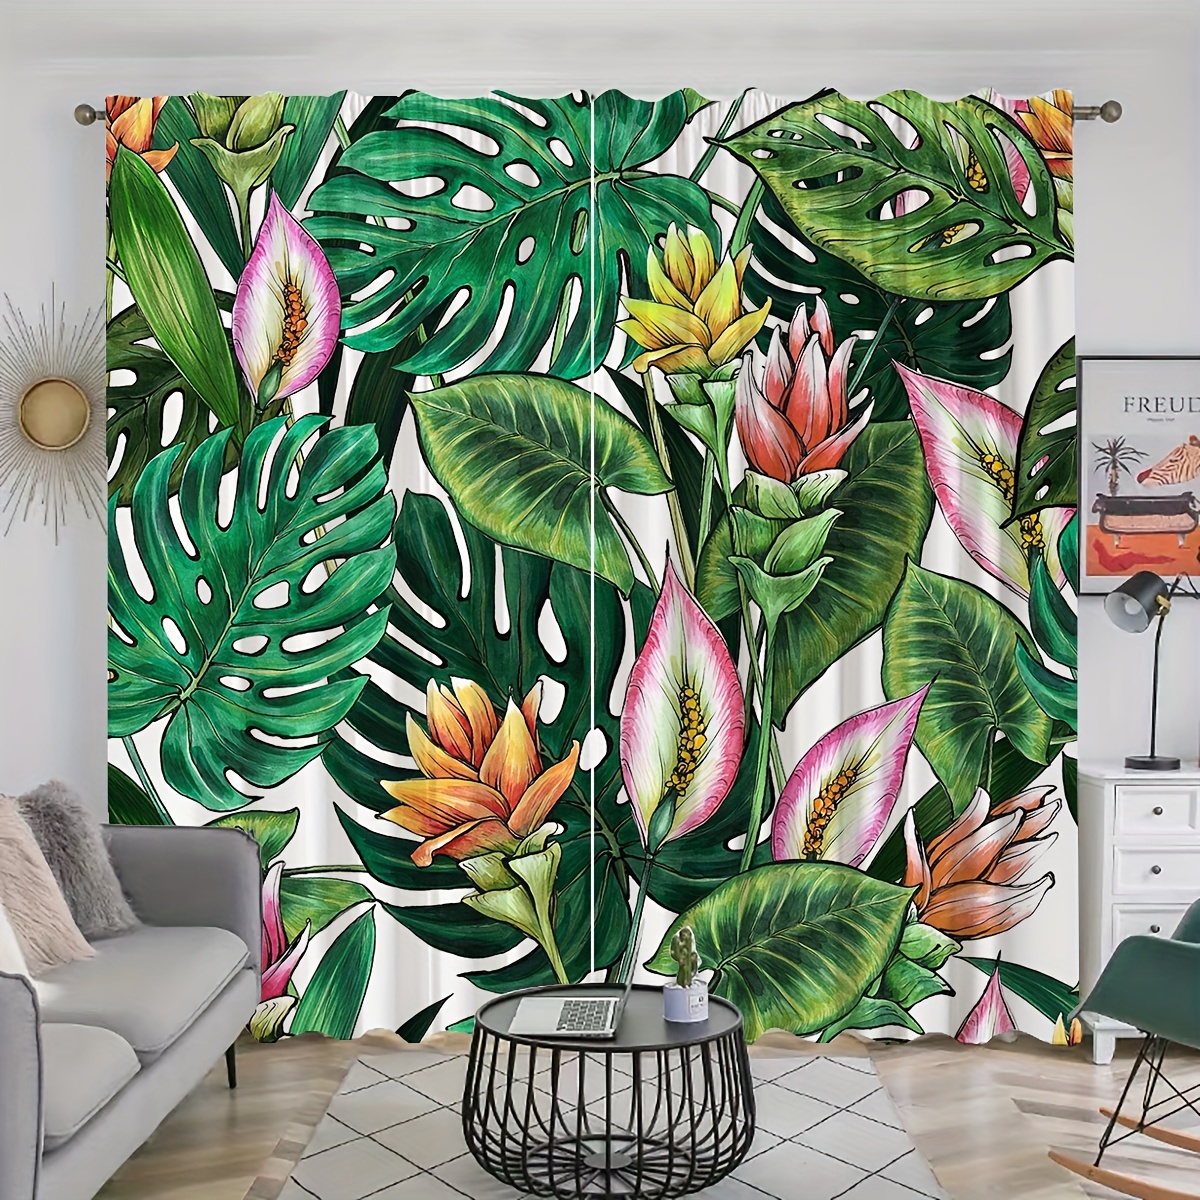 

2pcs Seamless Flower Watercolor Pattern Printing Curtains With Tropical Flowers And Leaves, Rod Pocket Curtain, Suitable For Dining Room Public Place Living Room Bedroom Office Study, Home Decor